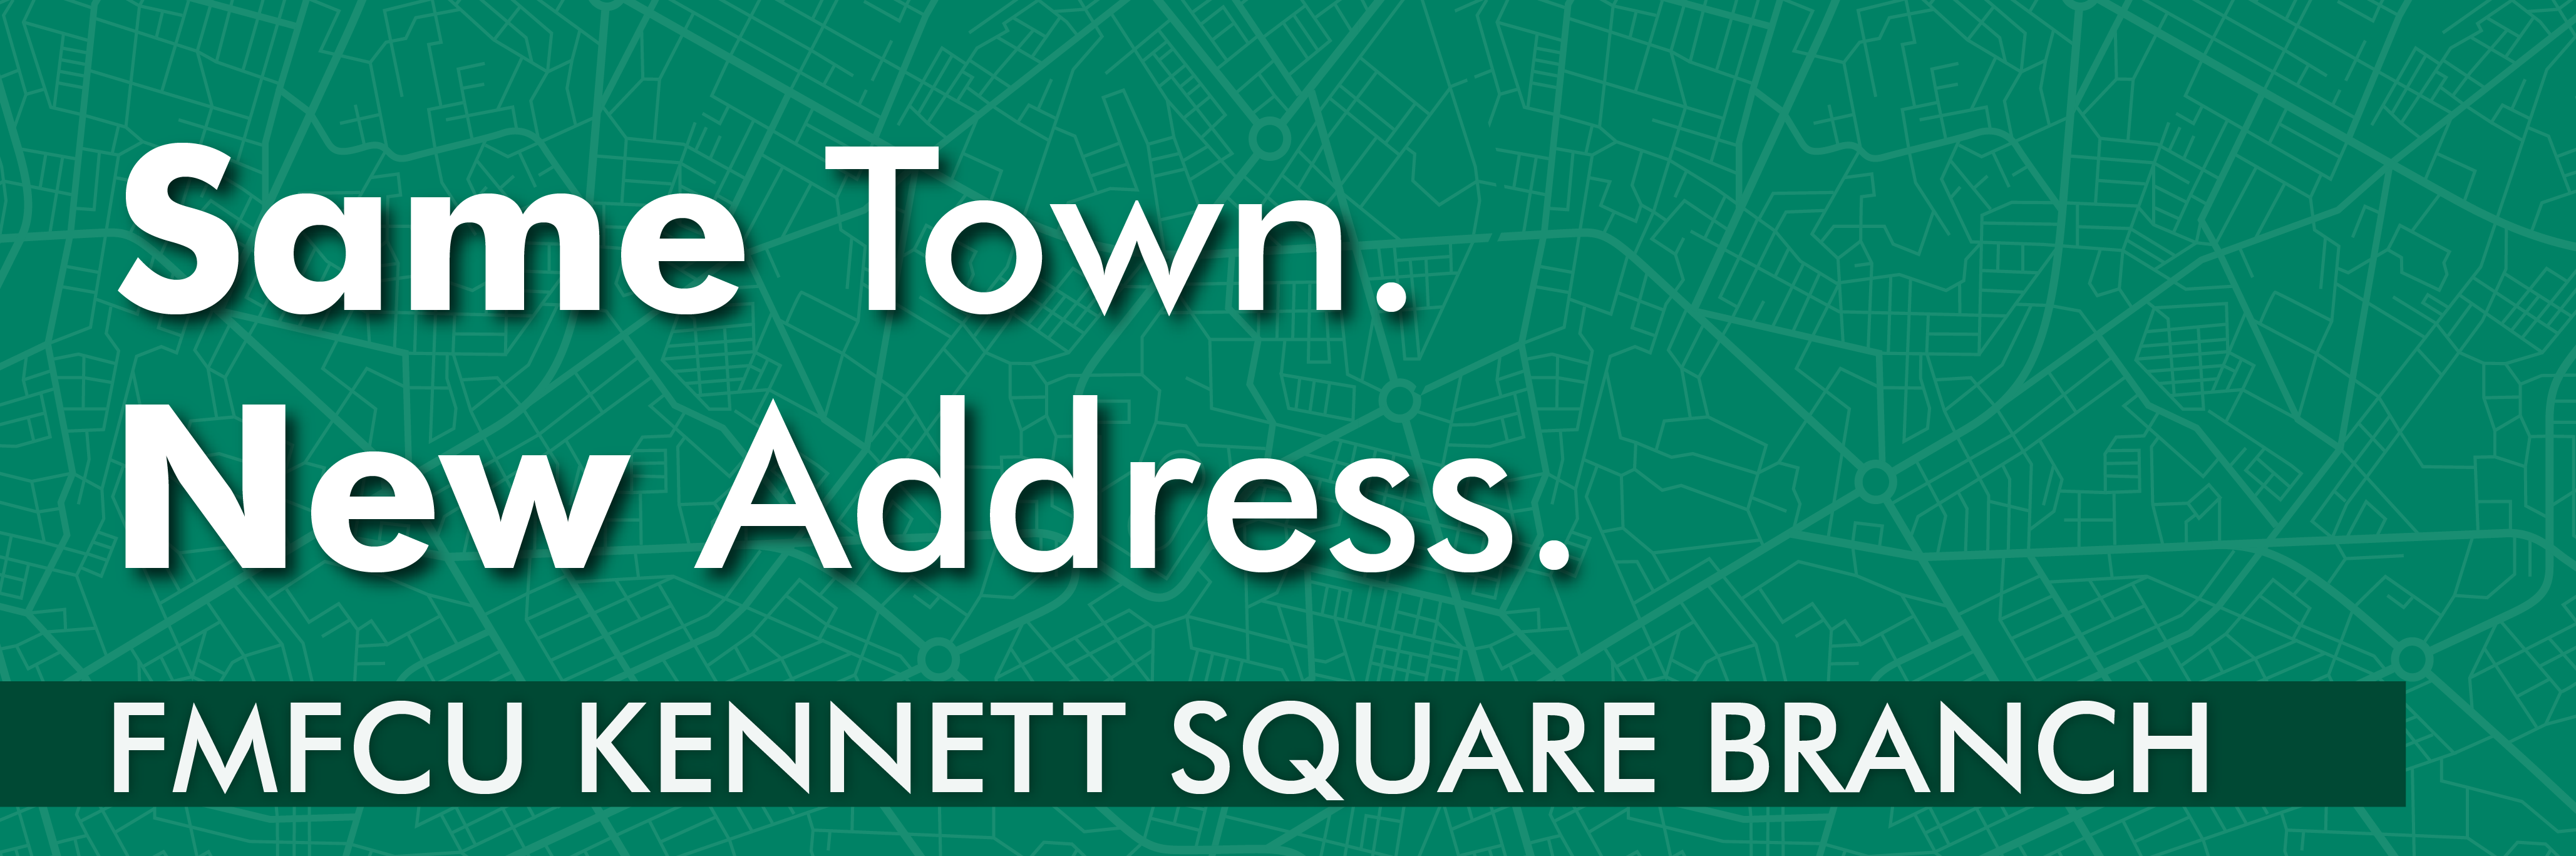 Same Town. New Address. FMFCU Kennett Square Branch is Now Reopen!